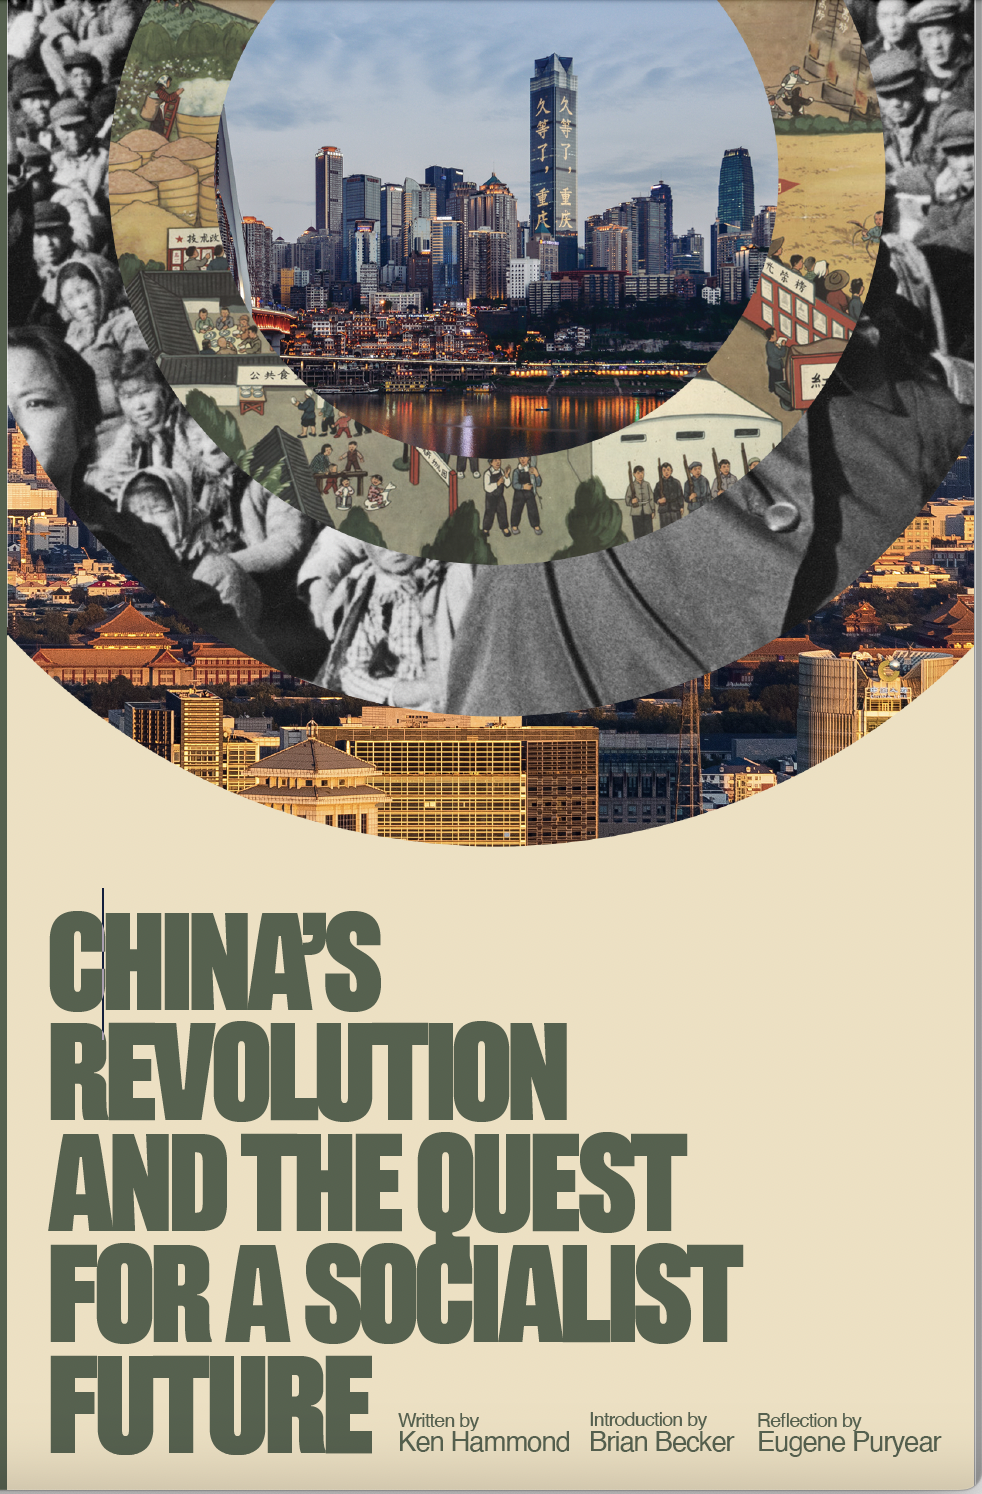 Chinas Revolution and the Quest for a Socialist Future